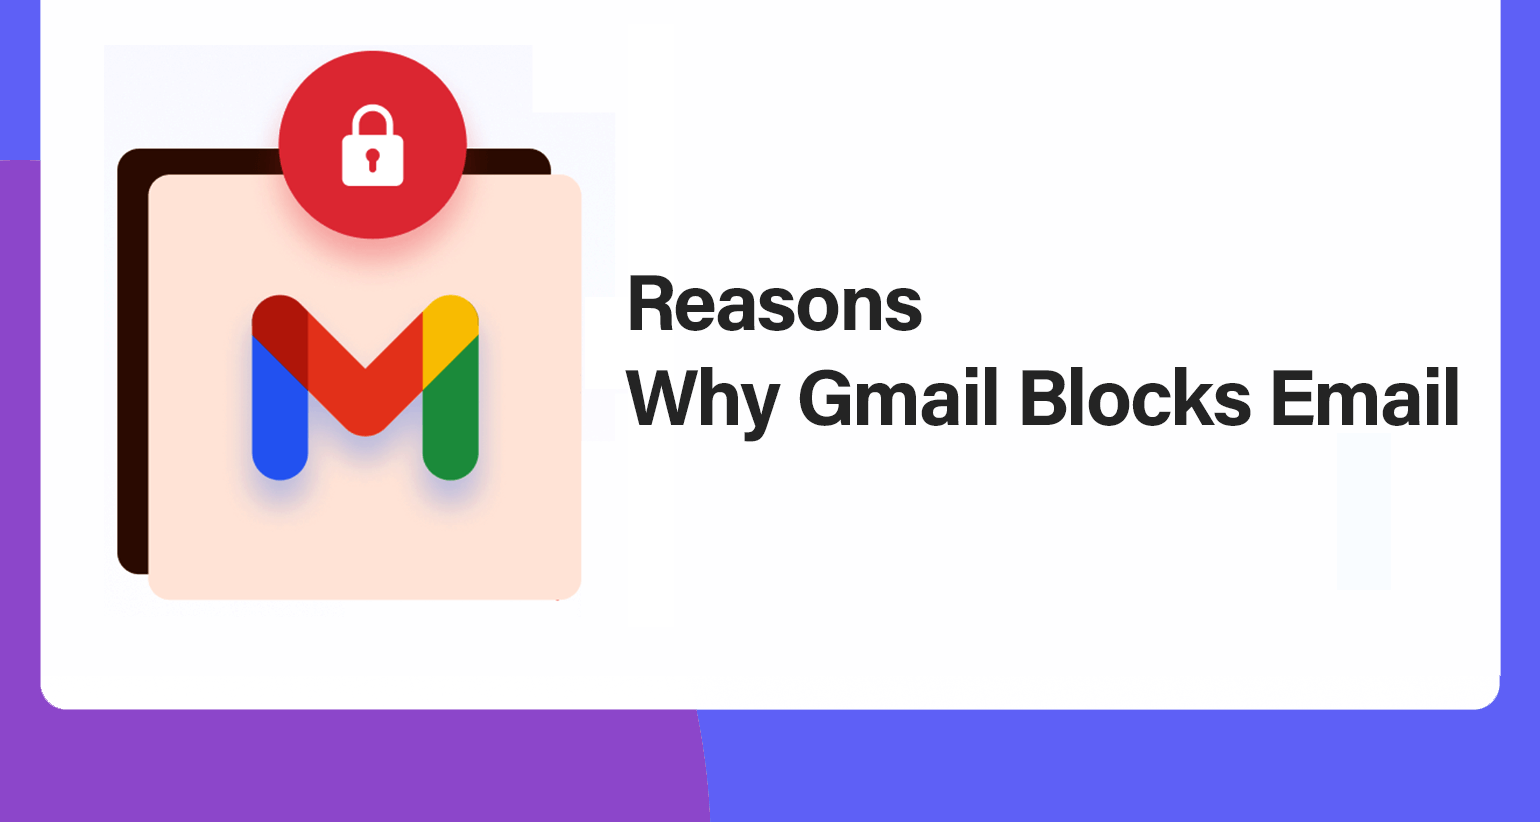 Reasons Why Gmail Blocks Emails